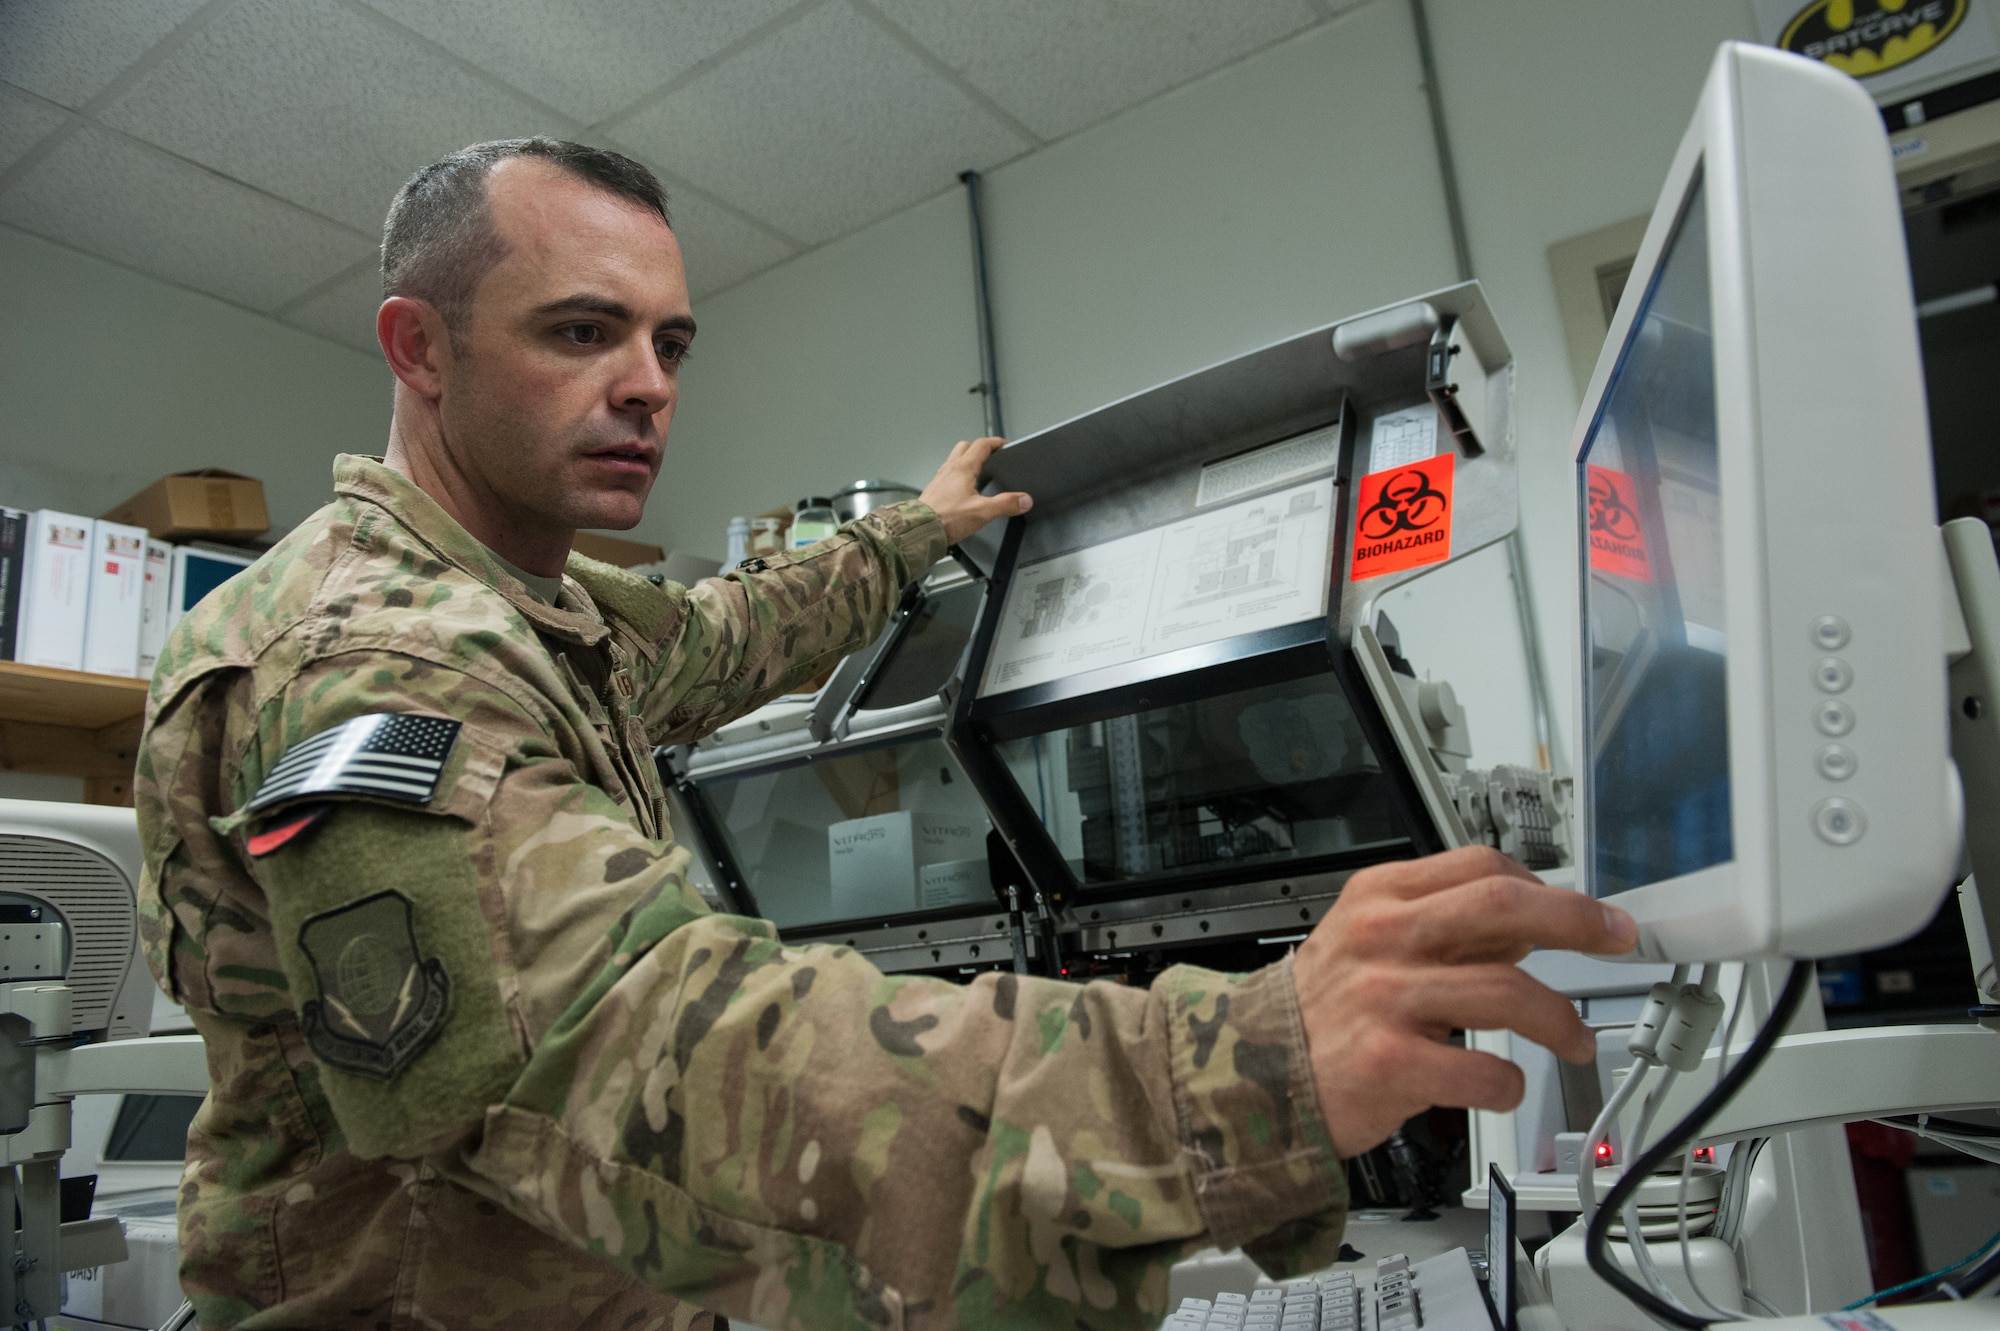 U.S. Air Force Tech. Sgt. Scott Hatch, 455th Expeditionary Medical Group biomedical equipment technician and Craig Joint Theater Hospital facility manager, performs maintenance on a blood testing machine at Bagram Air Field, Afghanistan, Sept. 24, 2015. (U.S. Air Force photo by Tech. Sgt. Joseph Swafford/Released)